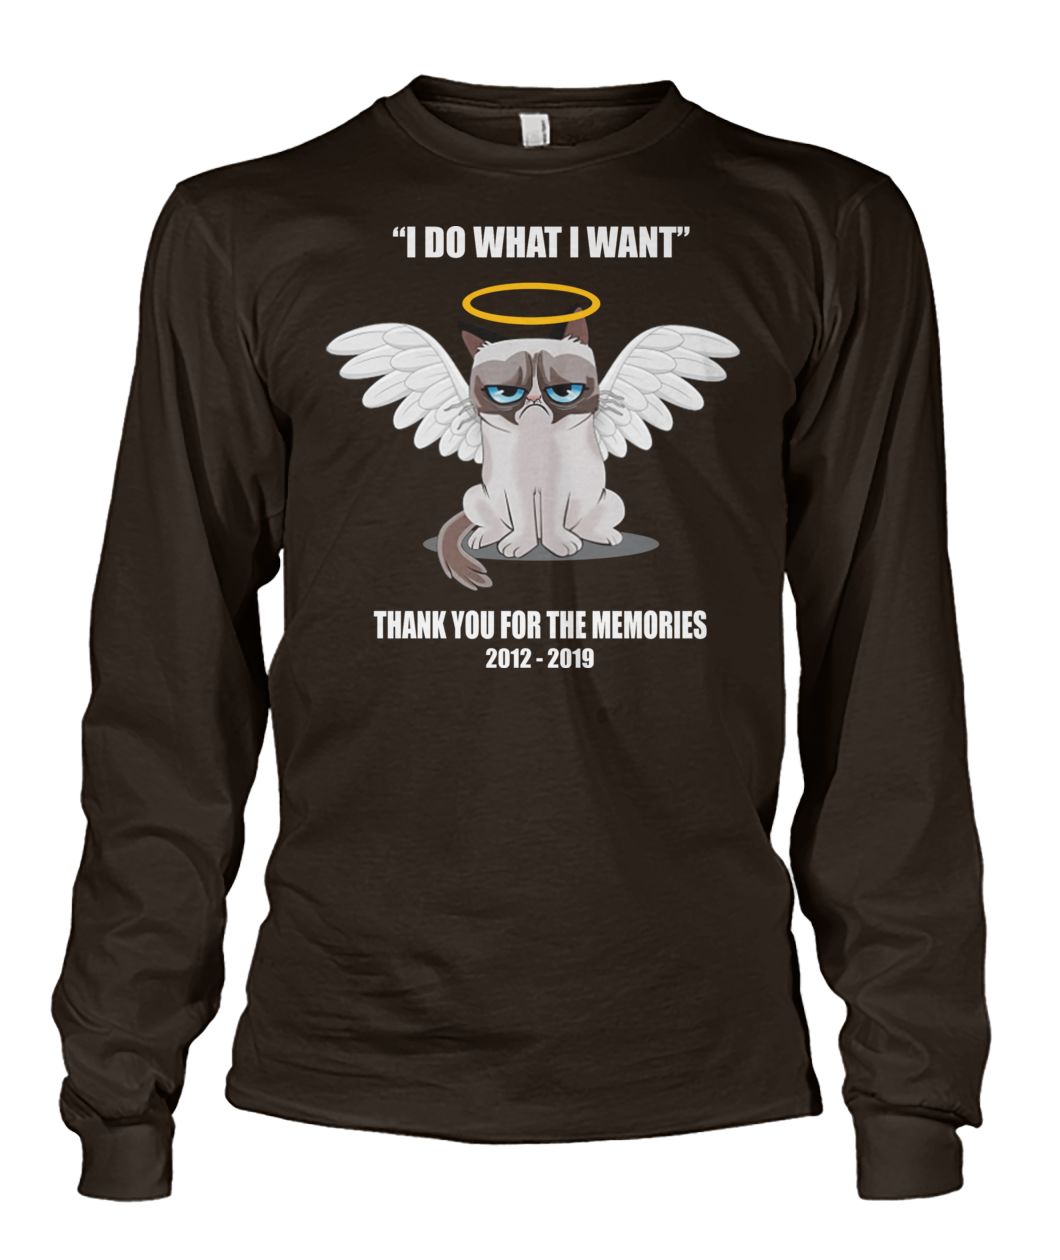 Grumpy cat I do what I want thank you for the memories unisex long sleeve